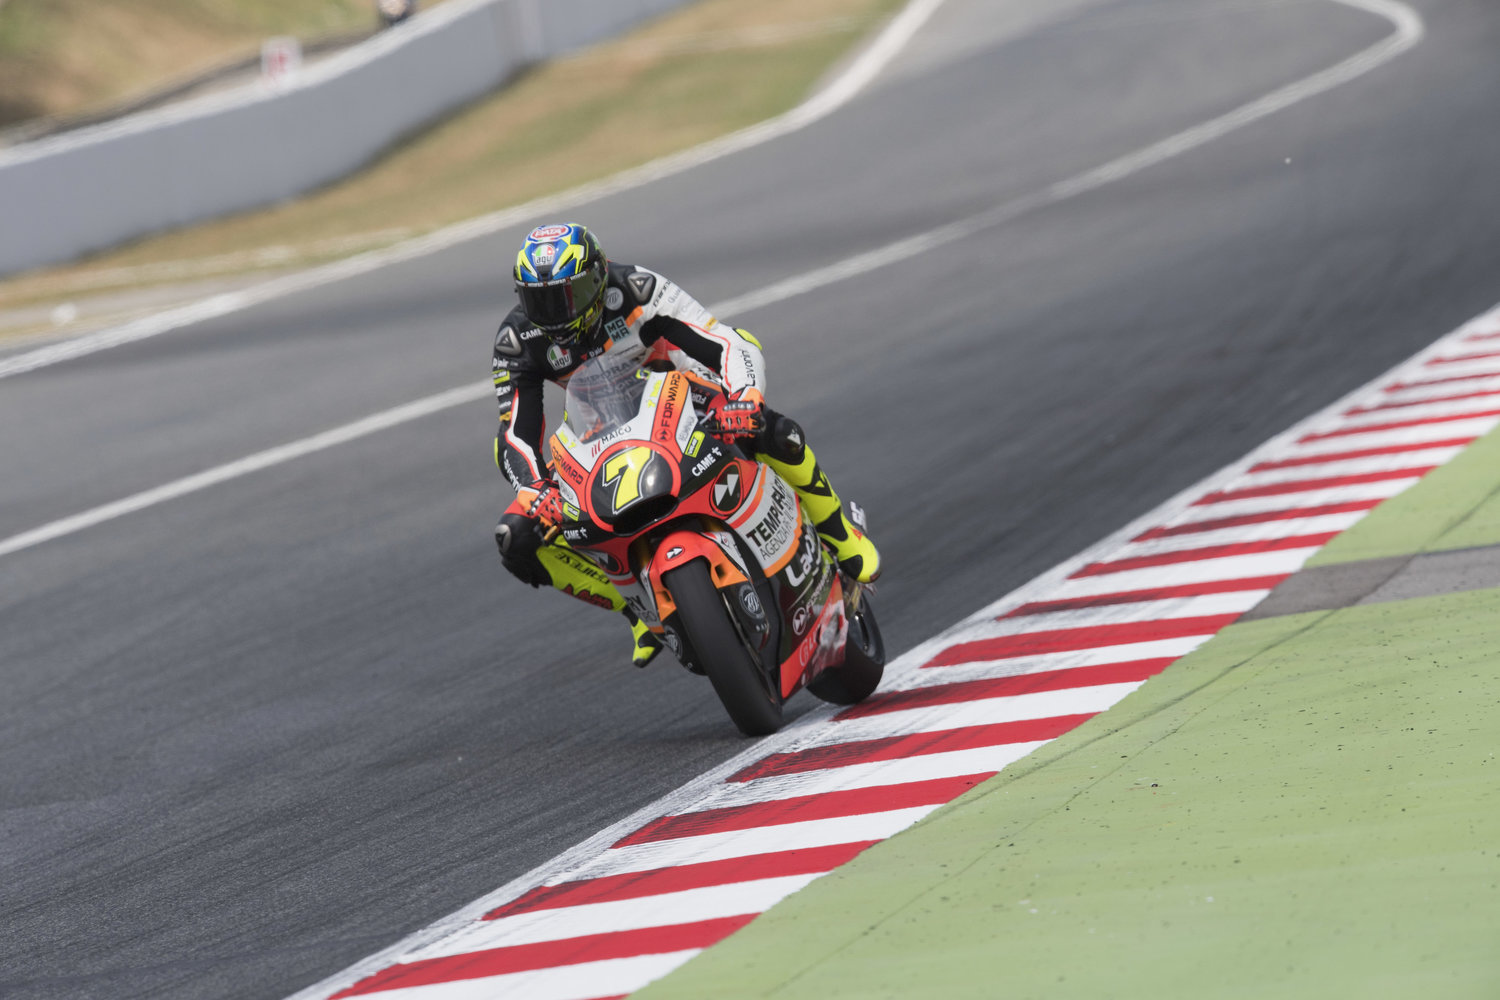 Challenging first day for the Forward Racing Team in Catalunya